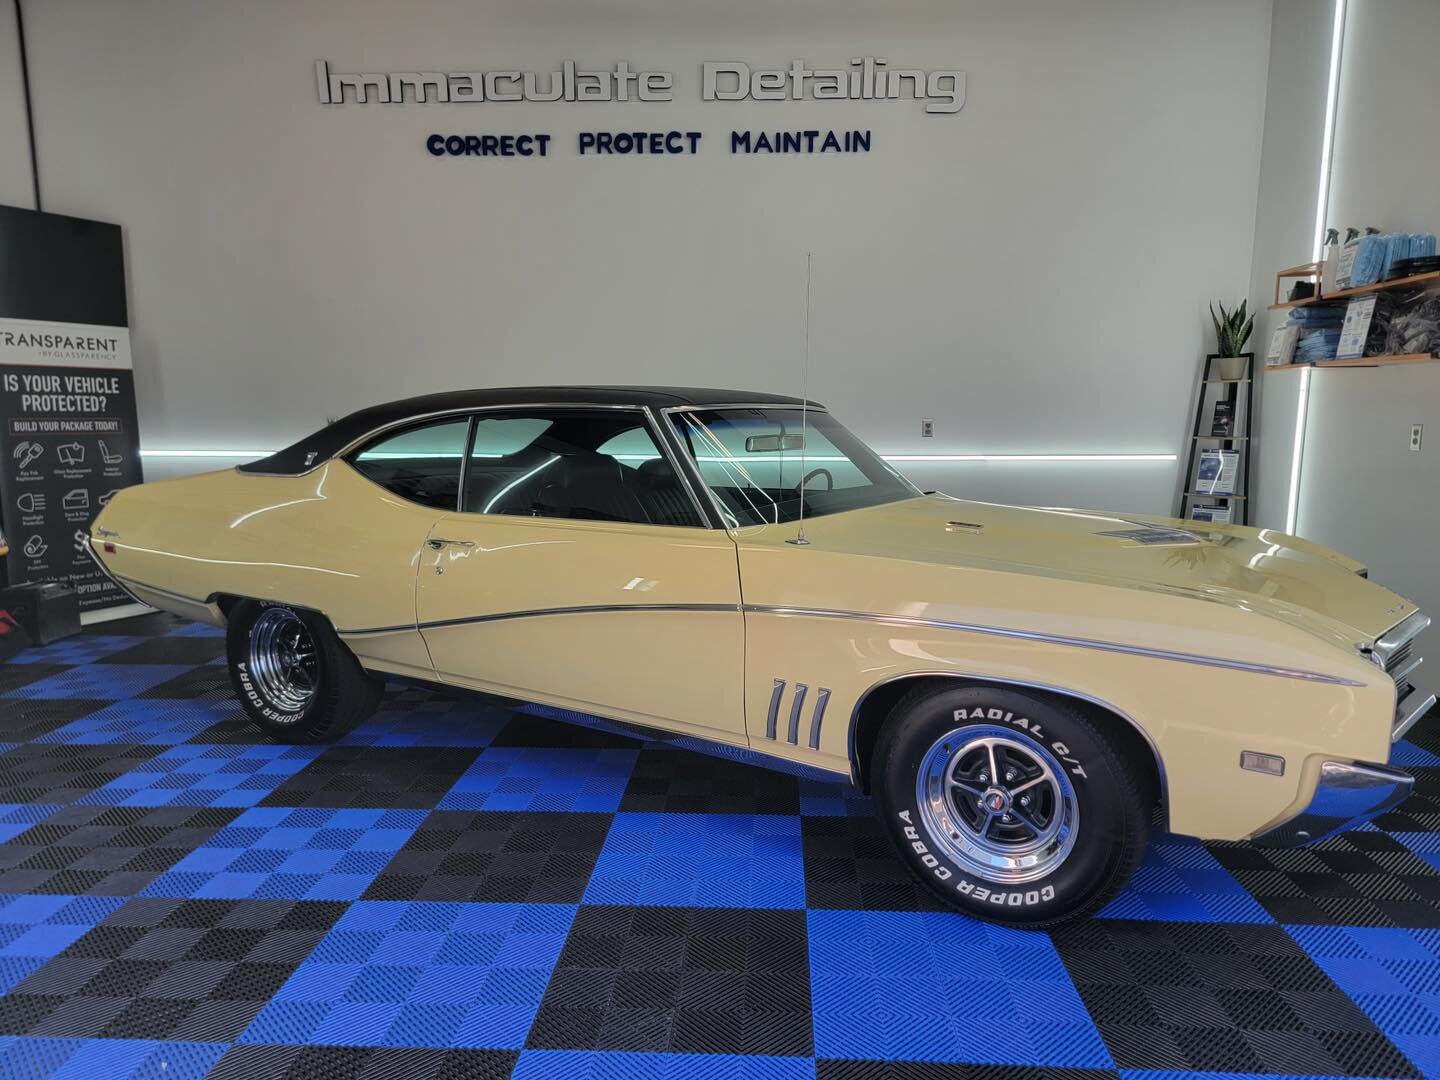 The 1969 Buick Skylark is a classic car that is renowned for its stylish design and impressive performance. This mid-size car was produced by General Motors during the late 1960s and was considered a luxurious alternative to other muscle cars of the 